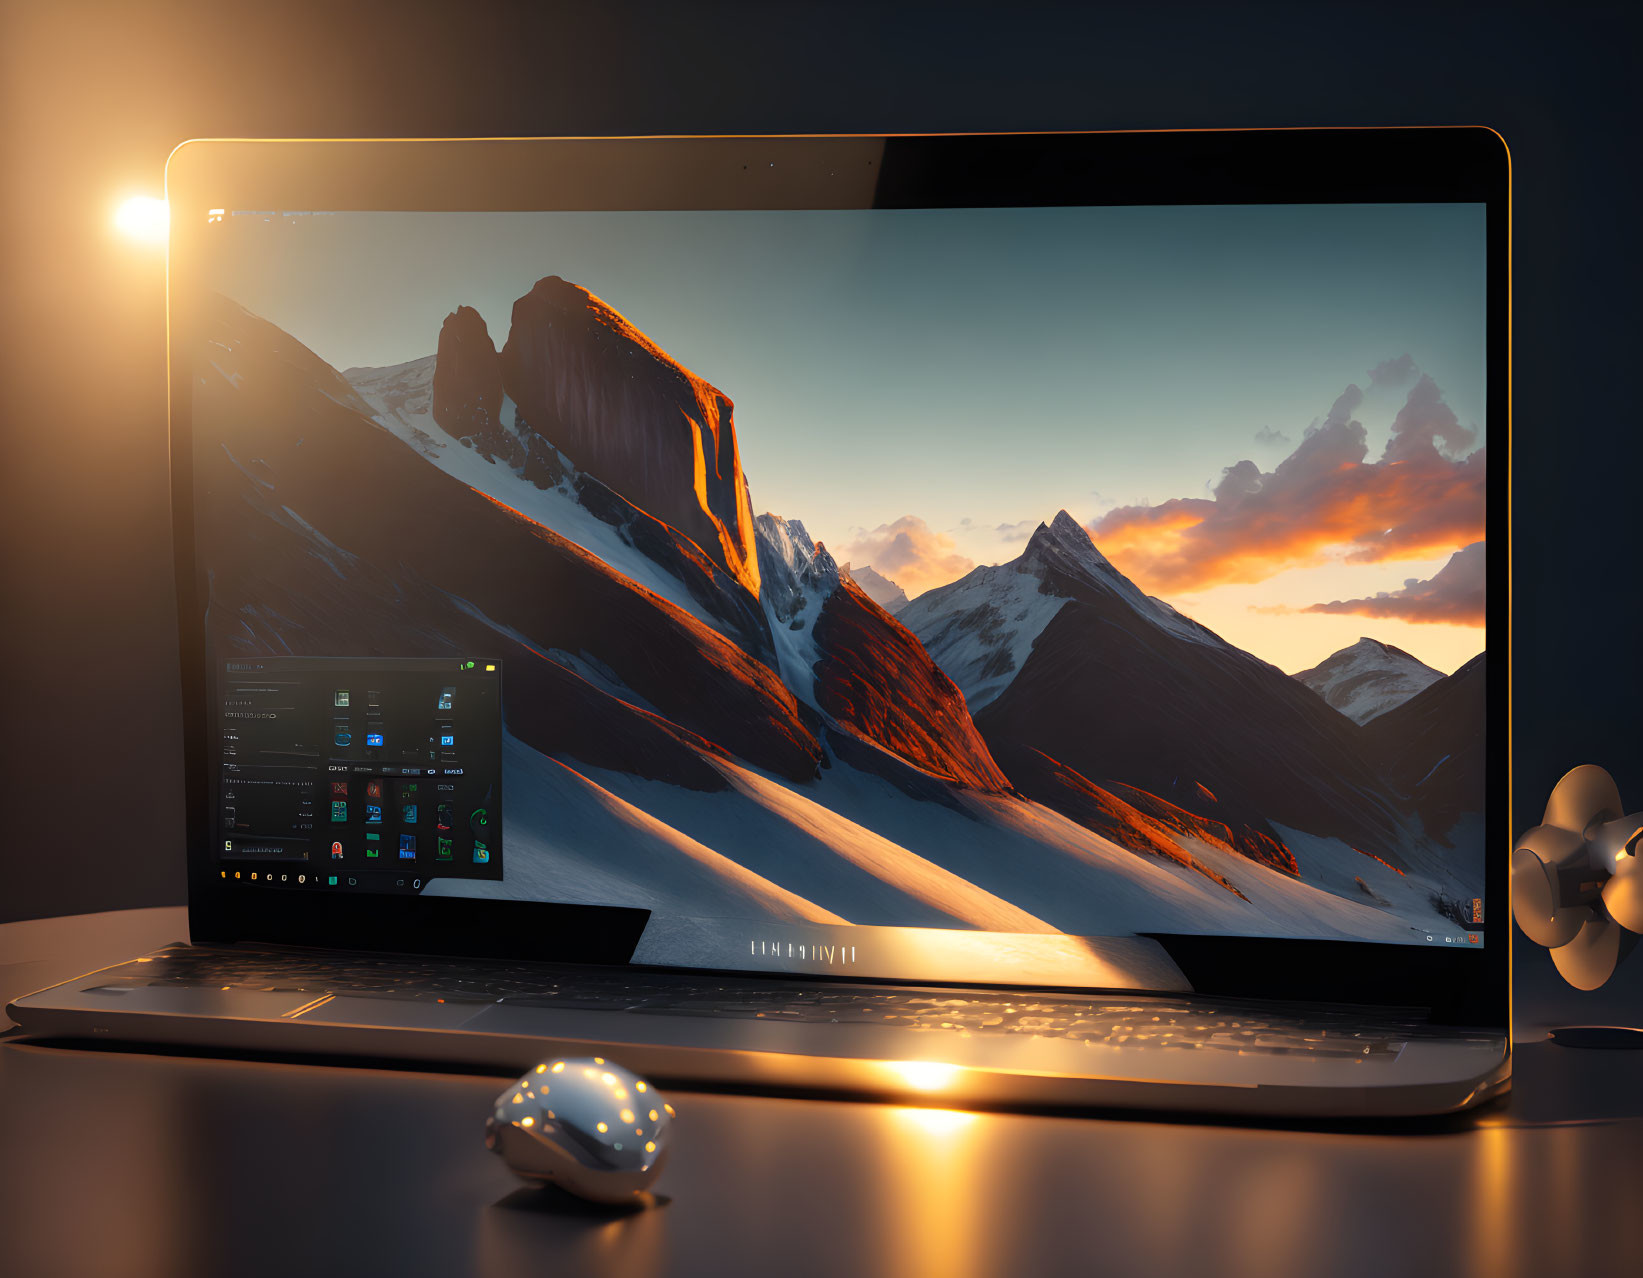 Sleek laptop on desk with snowy mountain wallpaper and decor